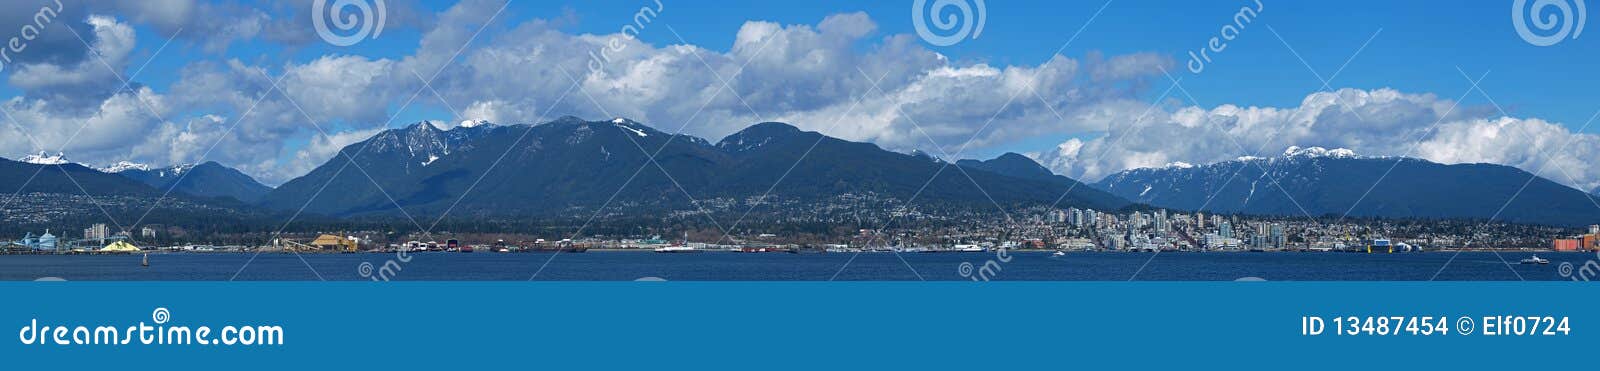 panorama image of north vancouver in a sunny day